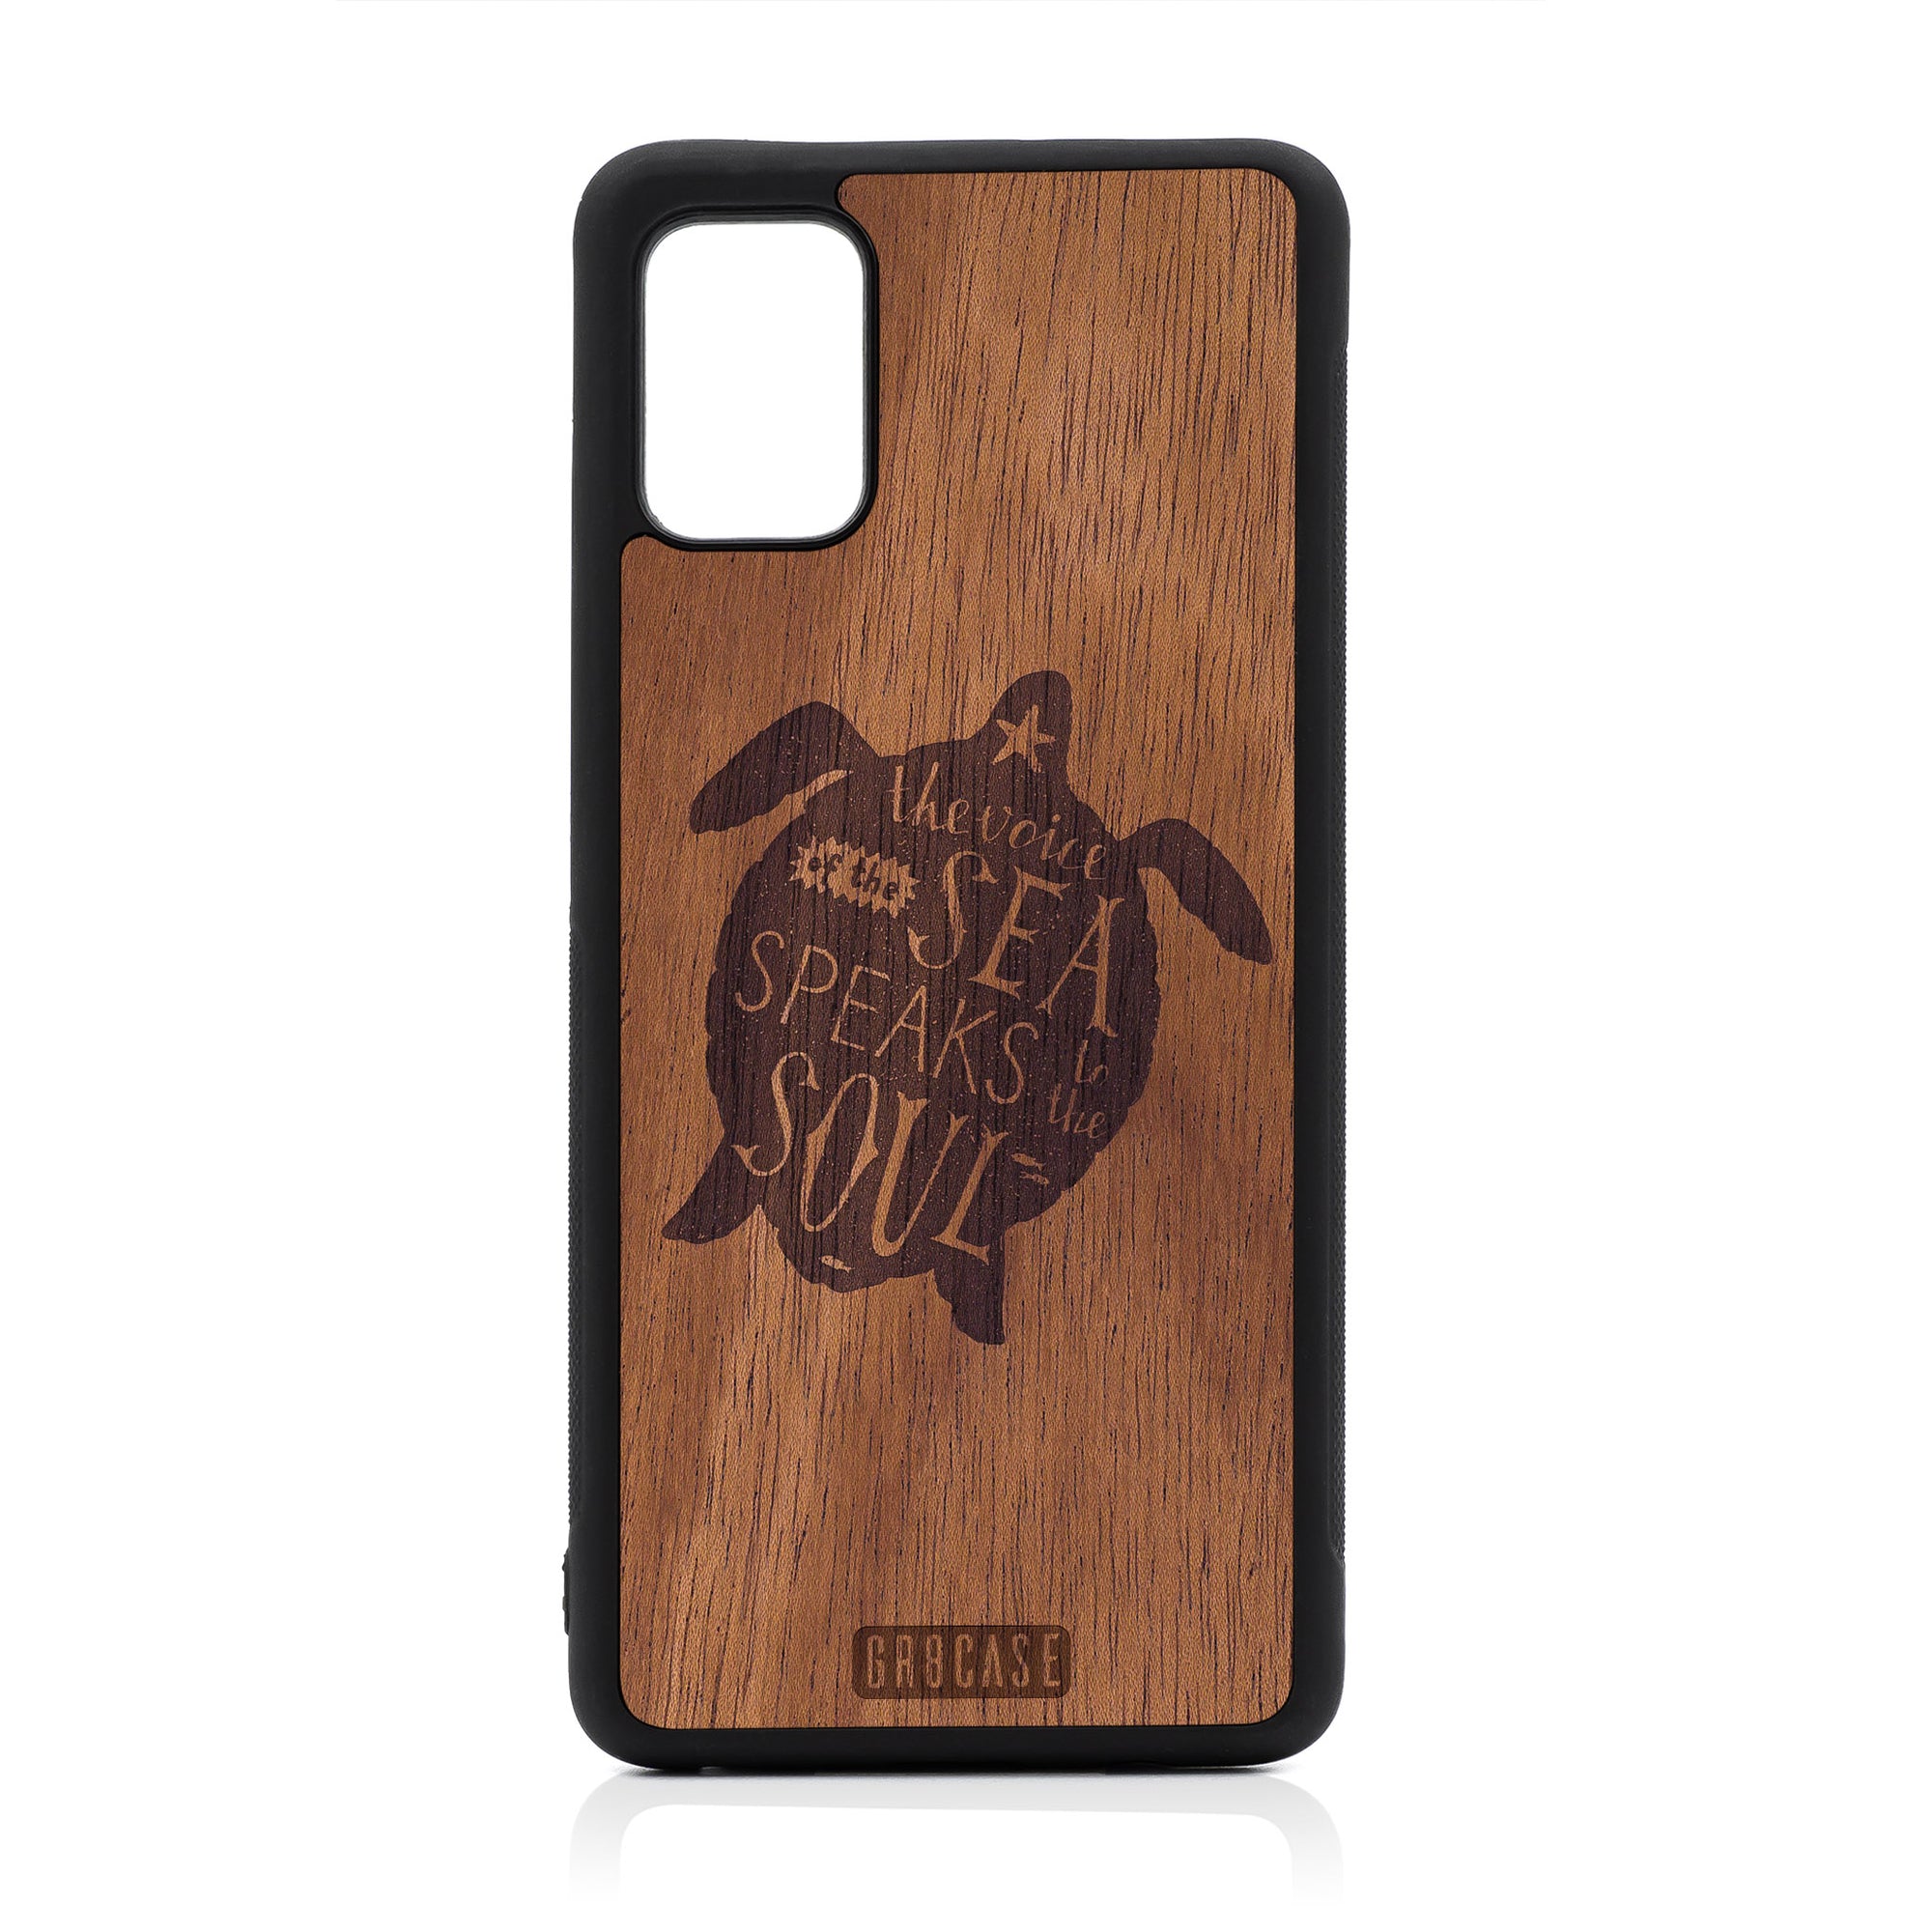 The Voice Of The Sea Speaks To The Soul (Turtle) Design Wood Case For Samsung Galaxy A51